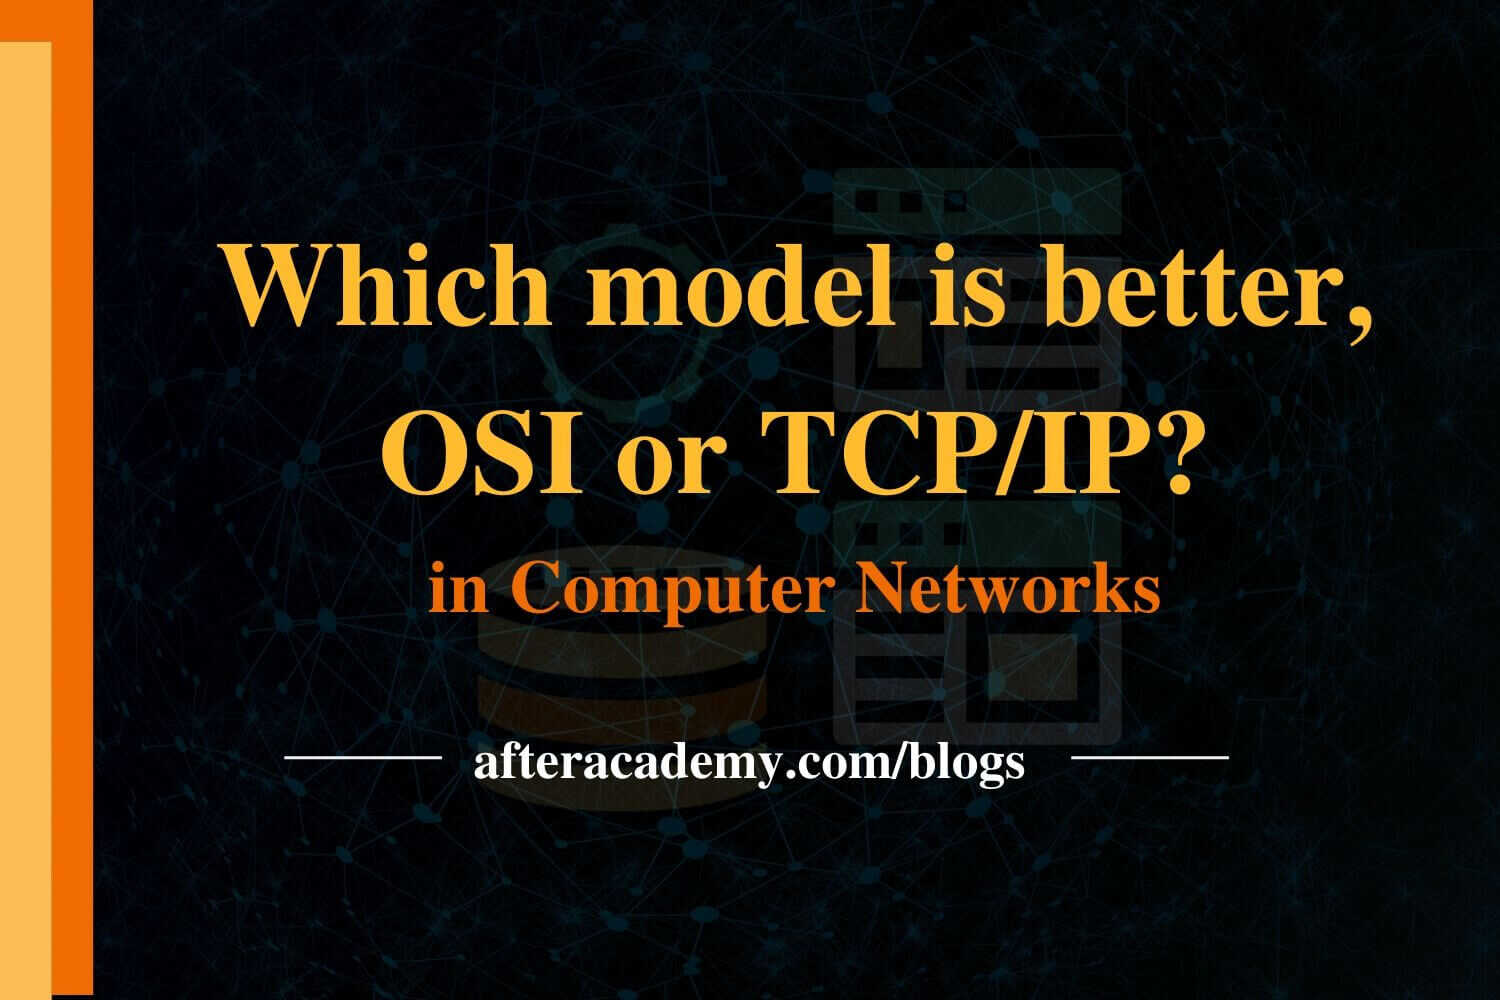 Which model is better, OSI or TCP/IP?